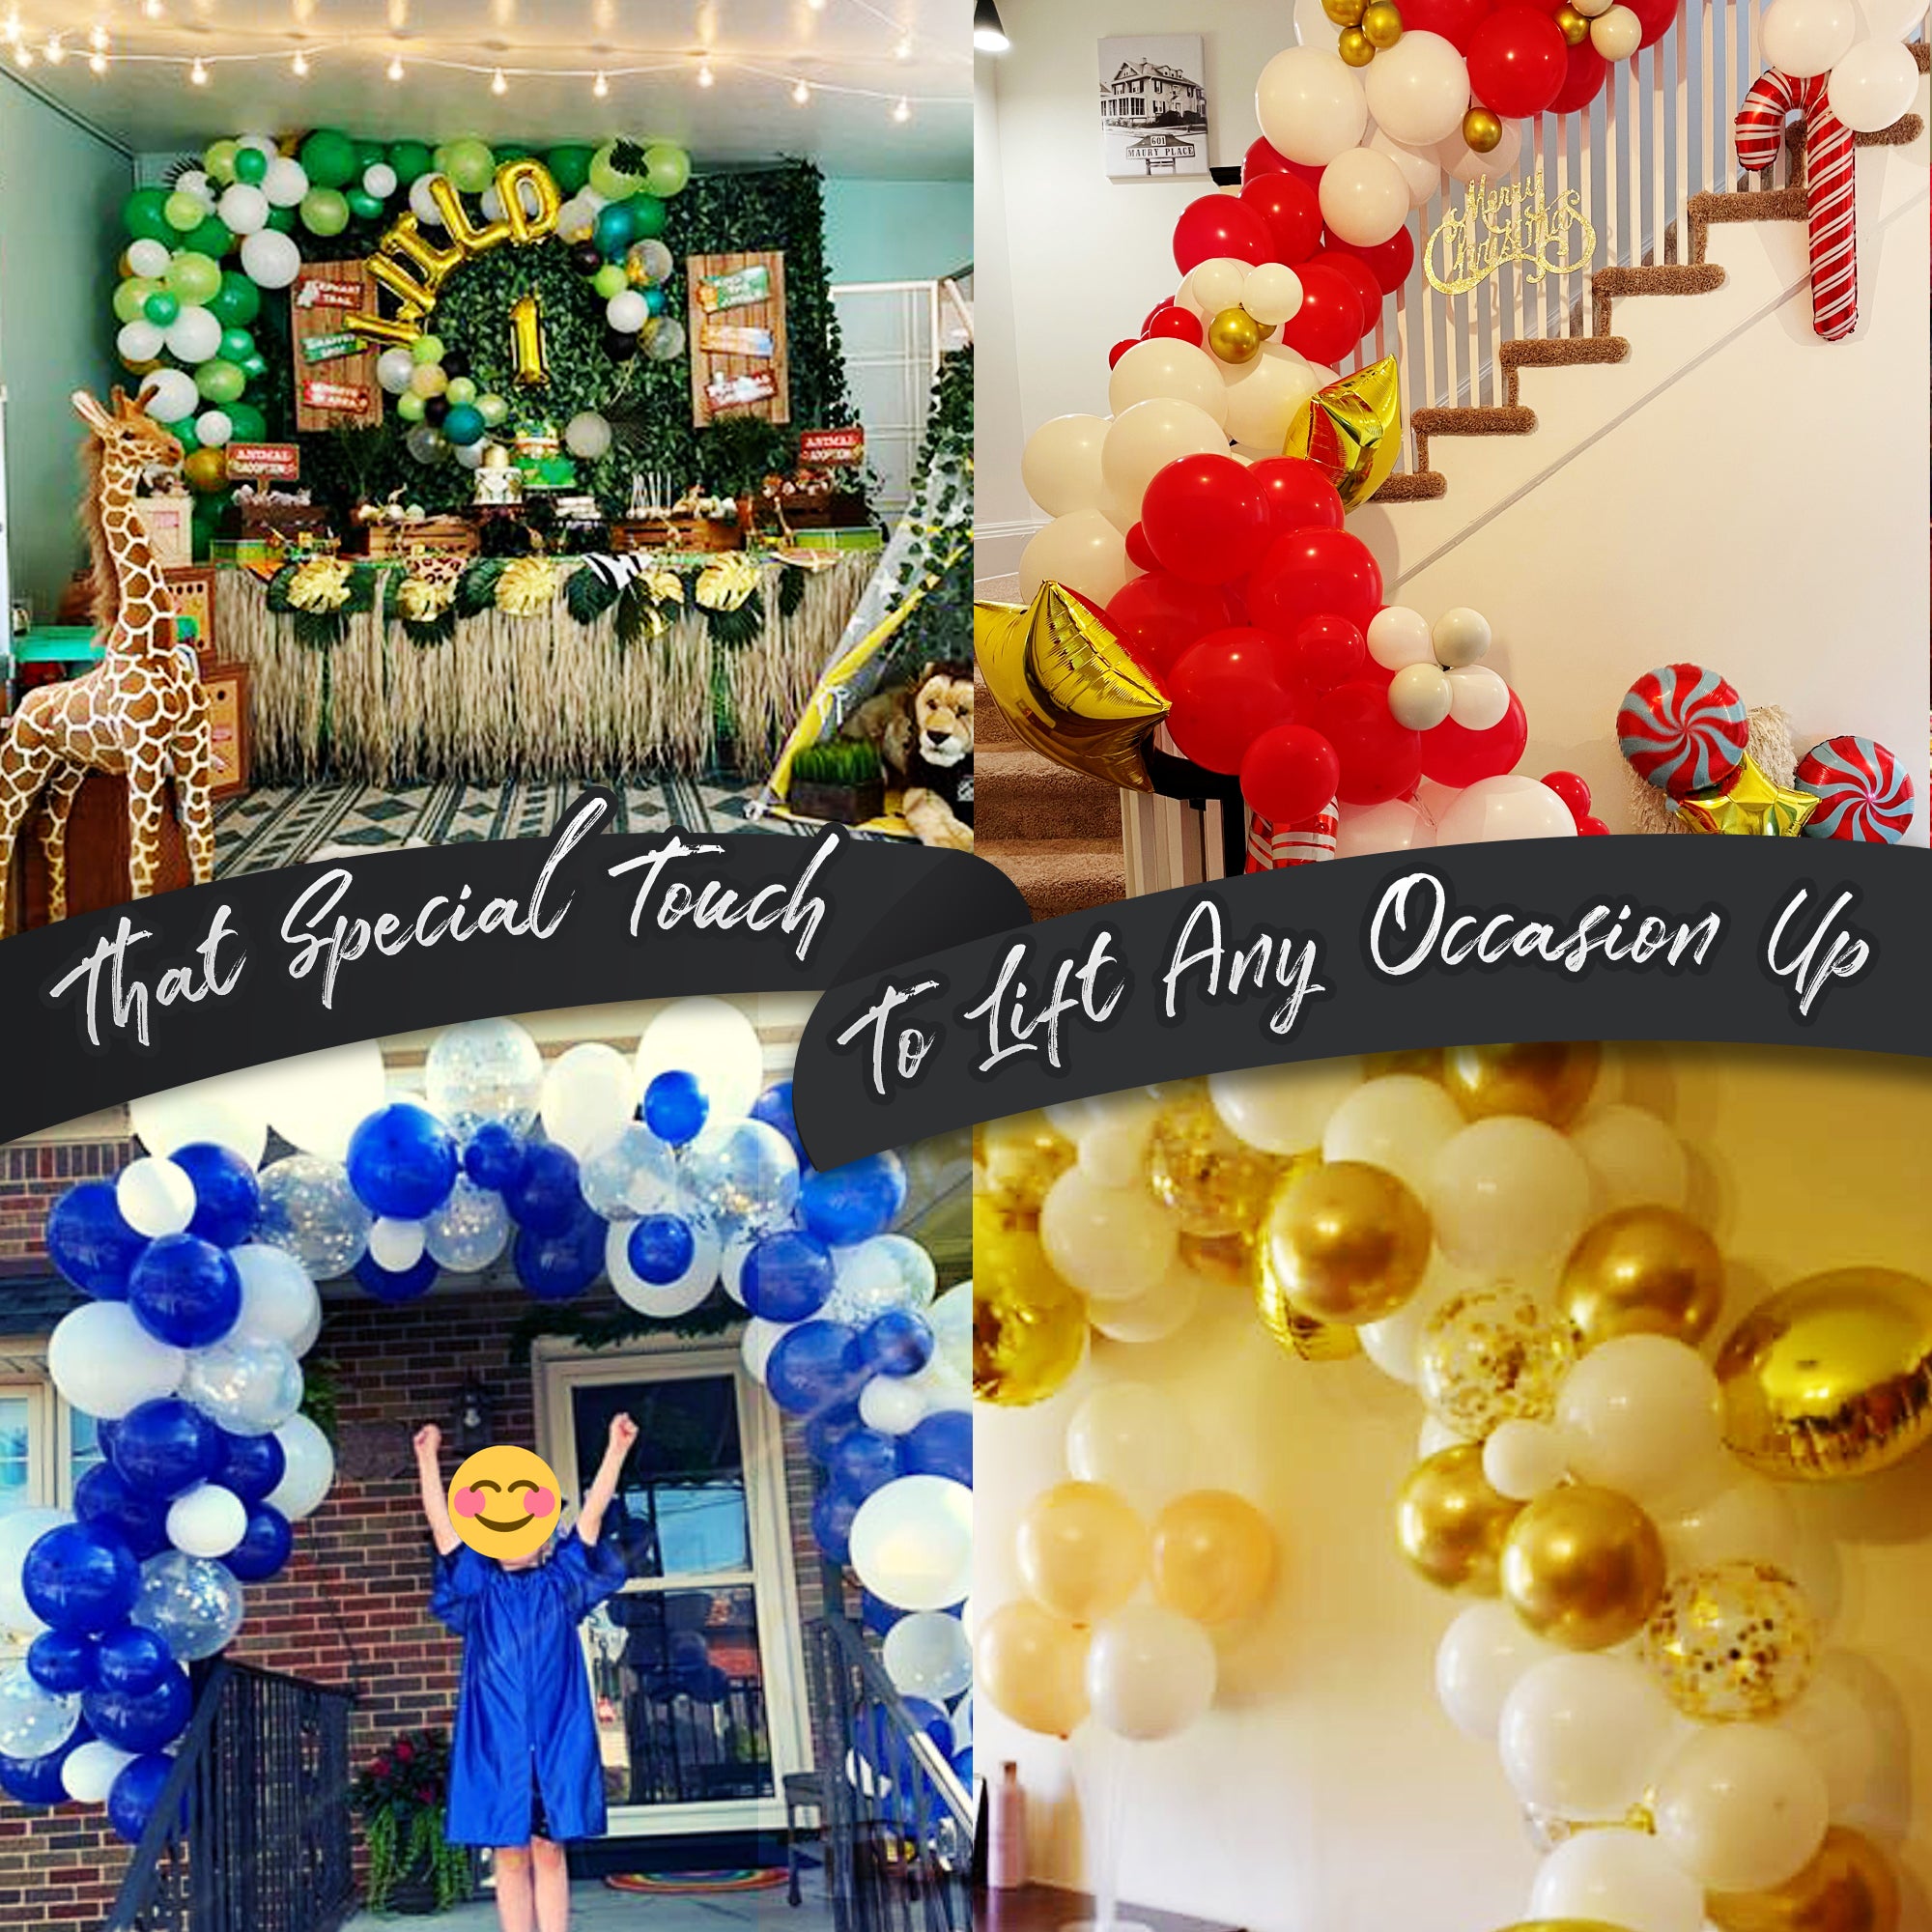 Balloon decorations for ice and snow themed party | Lazada PH